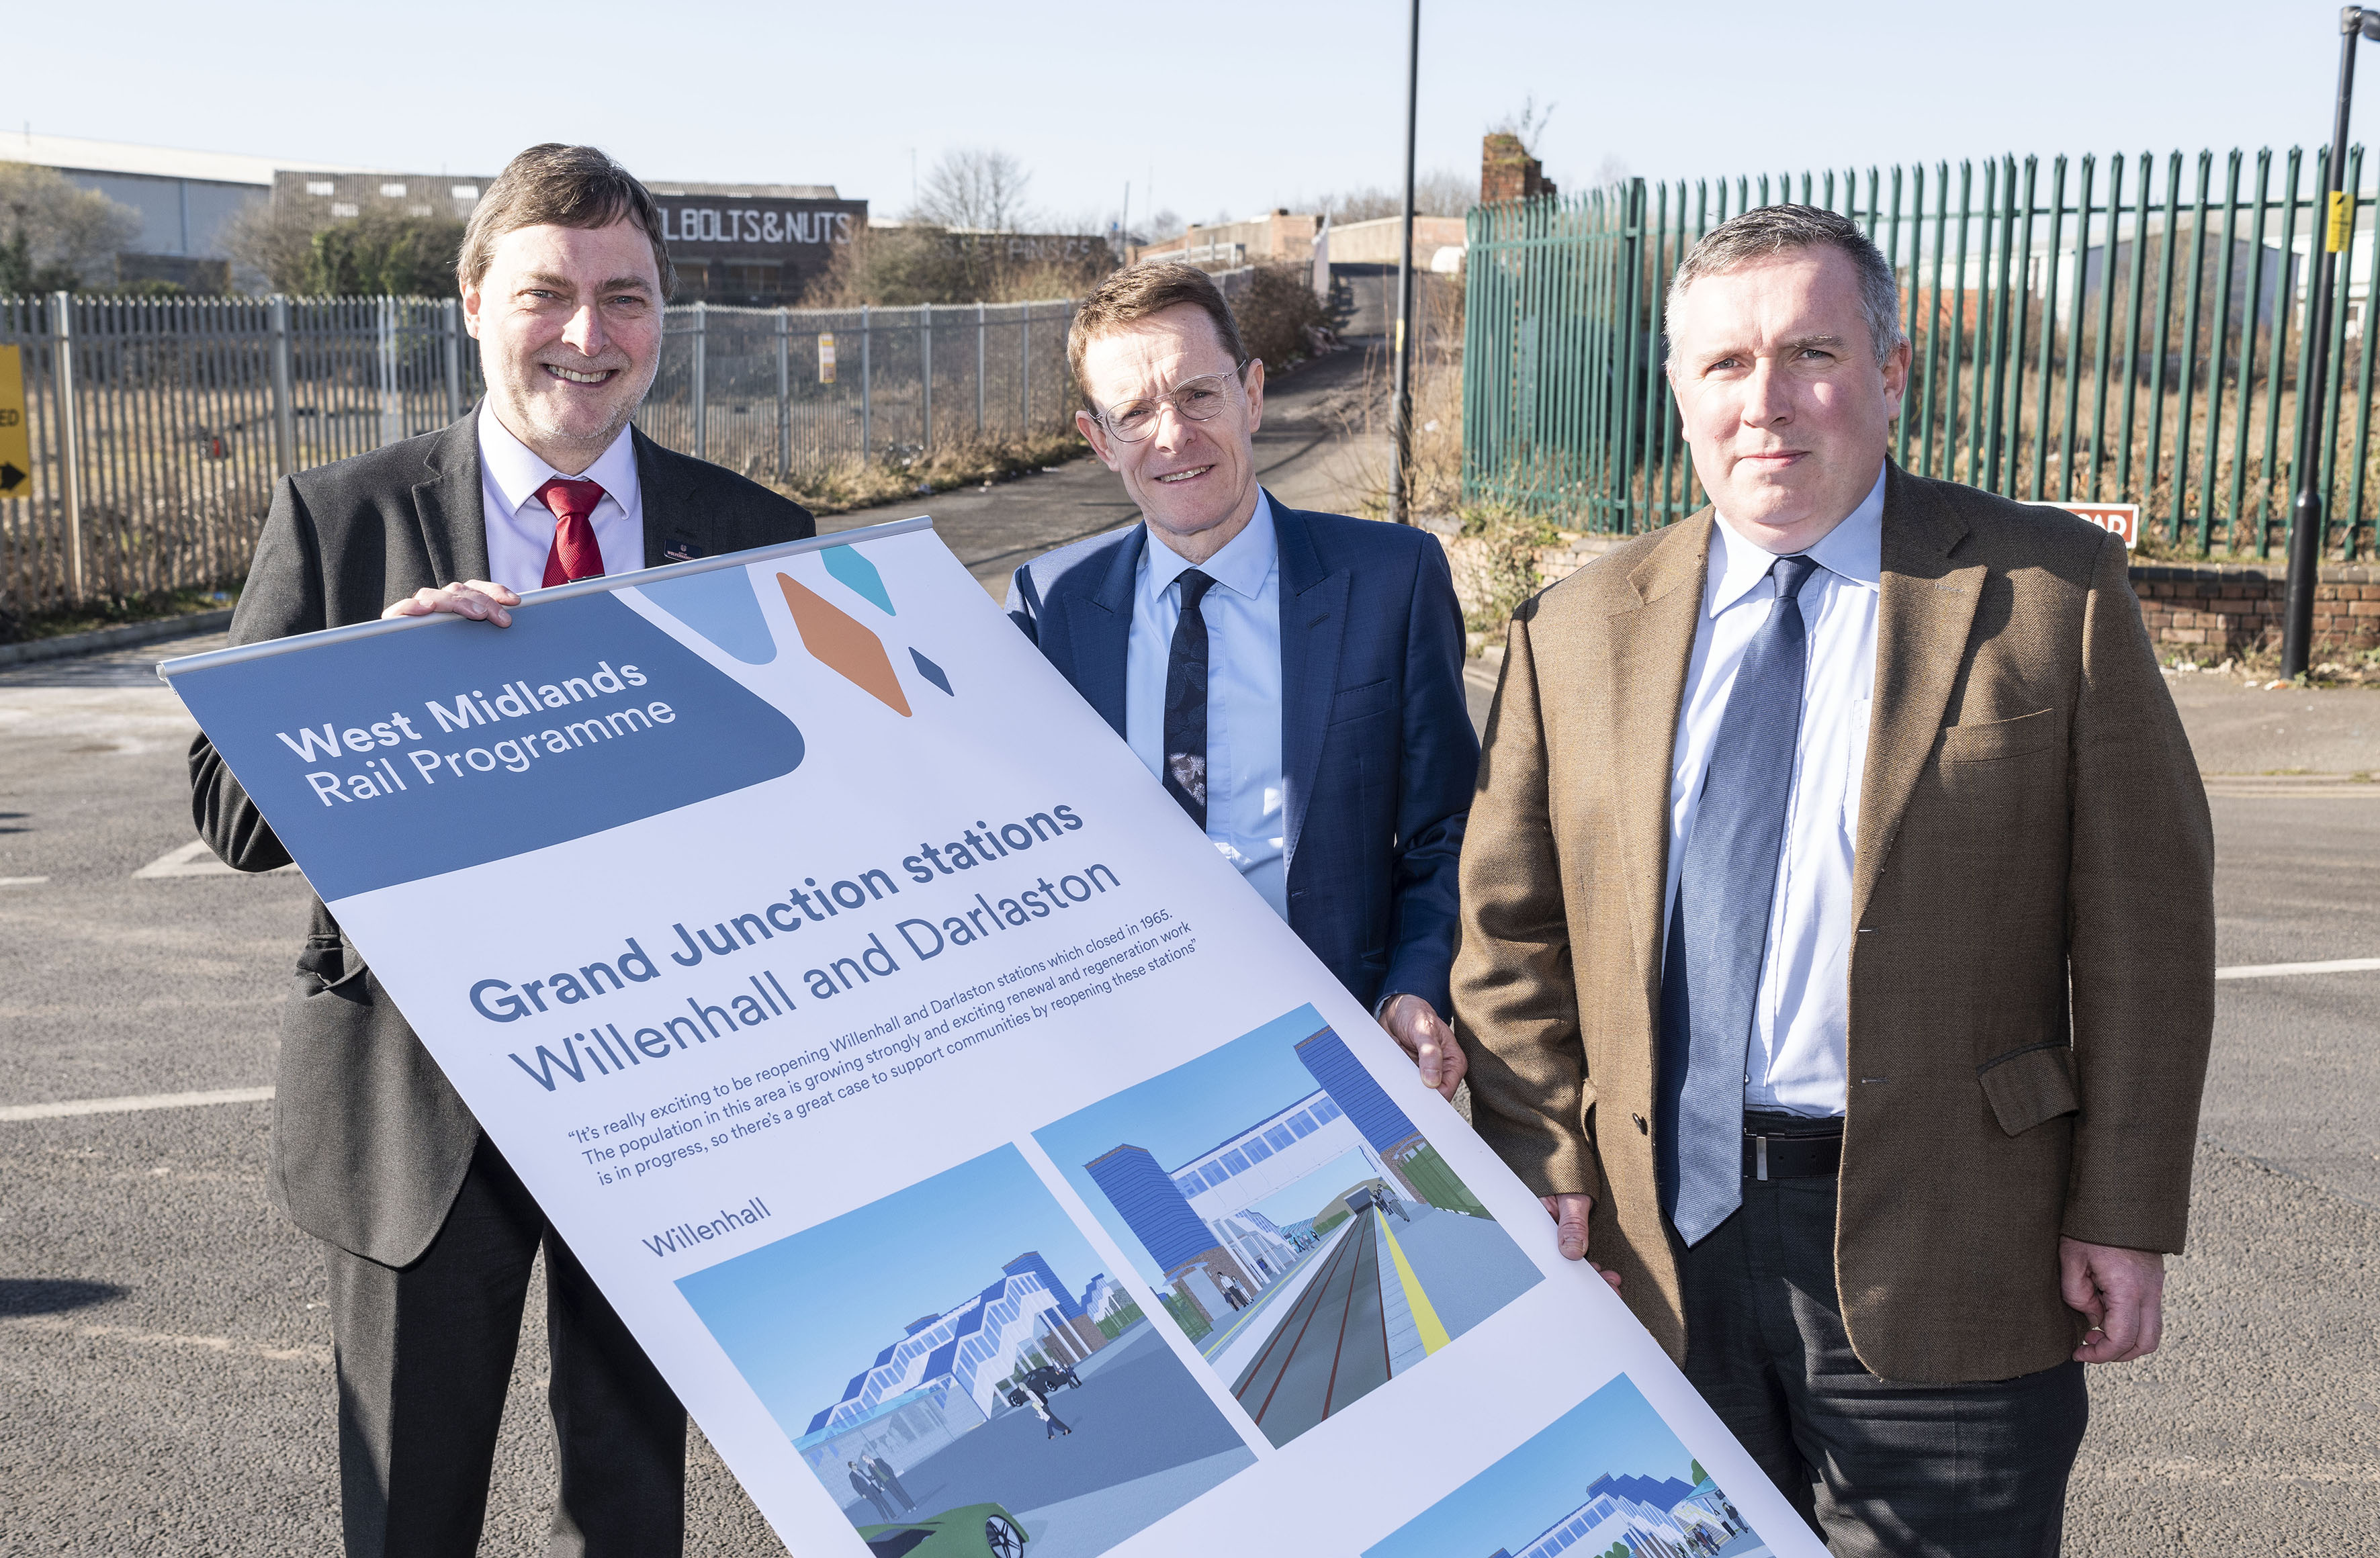 Cllr John Reynolds, City of Wolverhampton Council, Mayor of the West Midlands Andy Street and cllr Adrian Andrew, Walsall Council unveiled the plans at the Darlaston station site in 2019